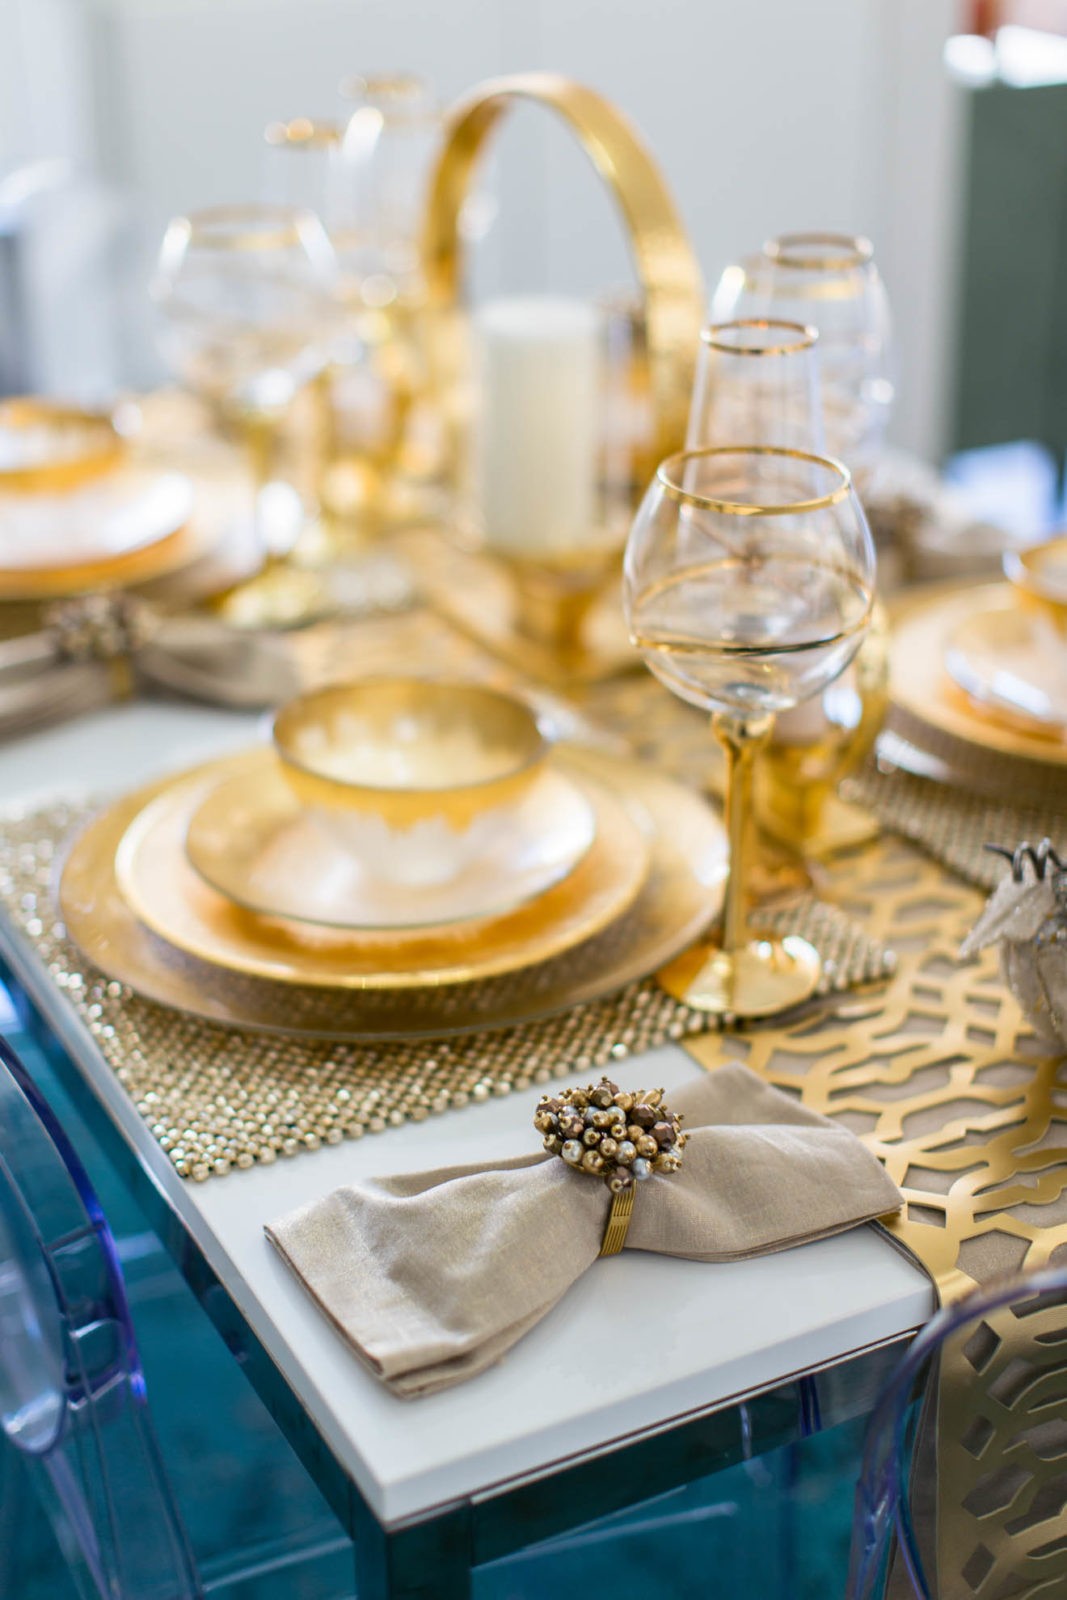 Z Gallerie Thanksgiving Tablescape + Giveaway, Laura Lily- Fashion, Travel and Lifestyle Blog, Fall Table Decor Ideas, Thanksgiving Decorating Ideas, - Z Gallerie Thanksgiving Tablescape by popular Los Angeles style blogger Laura Lily